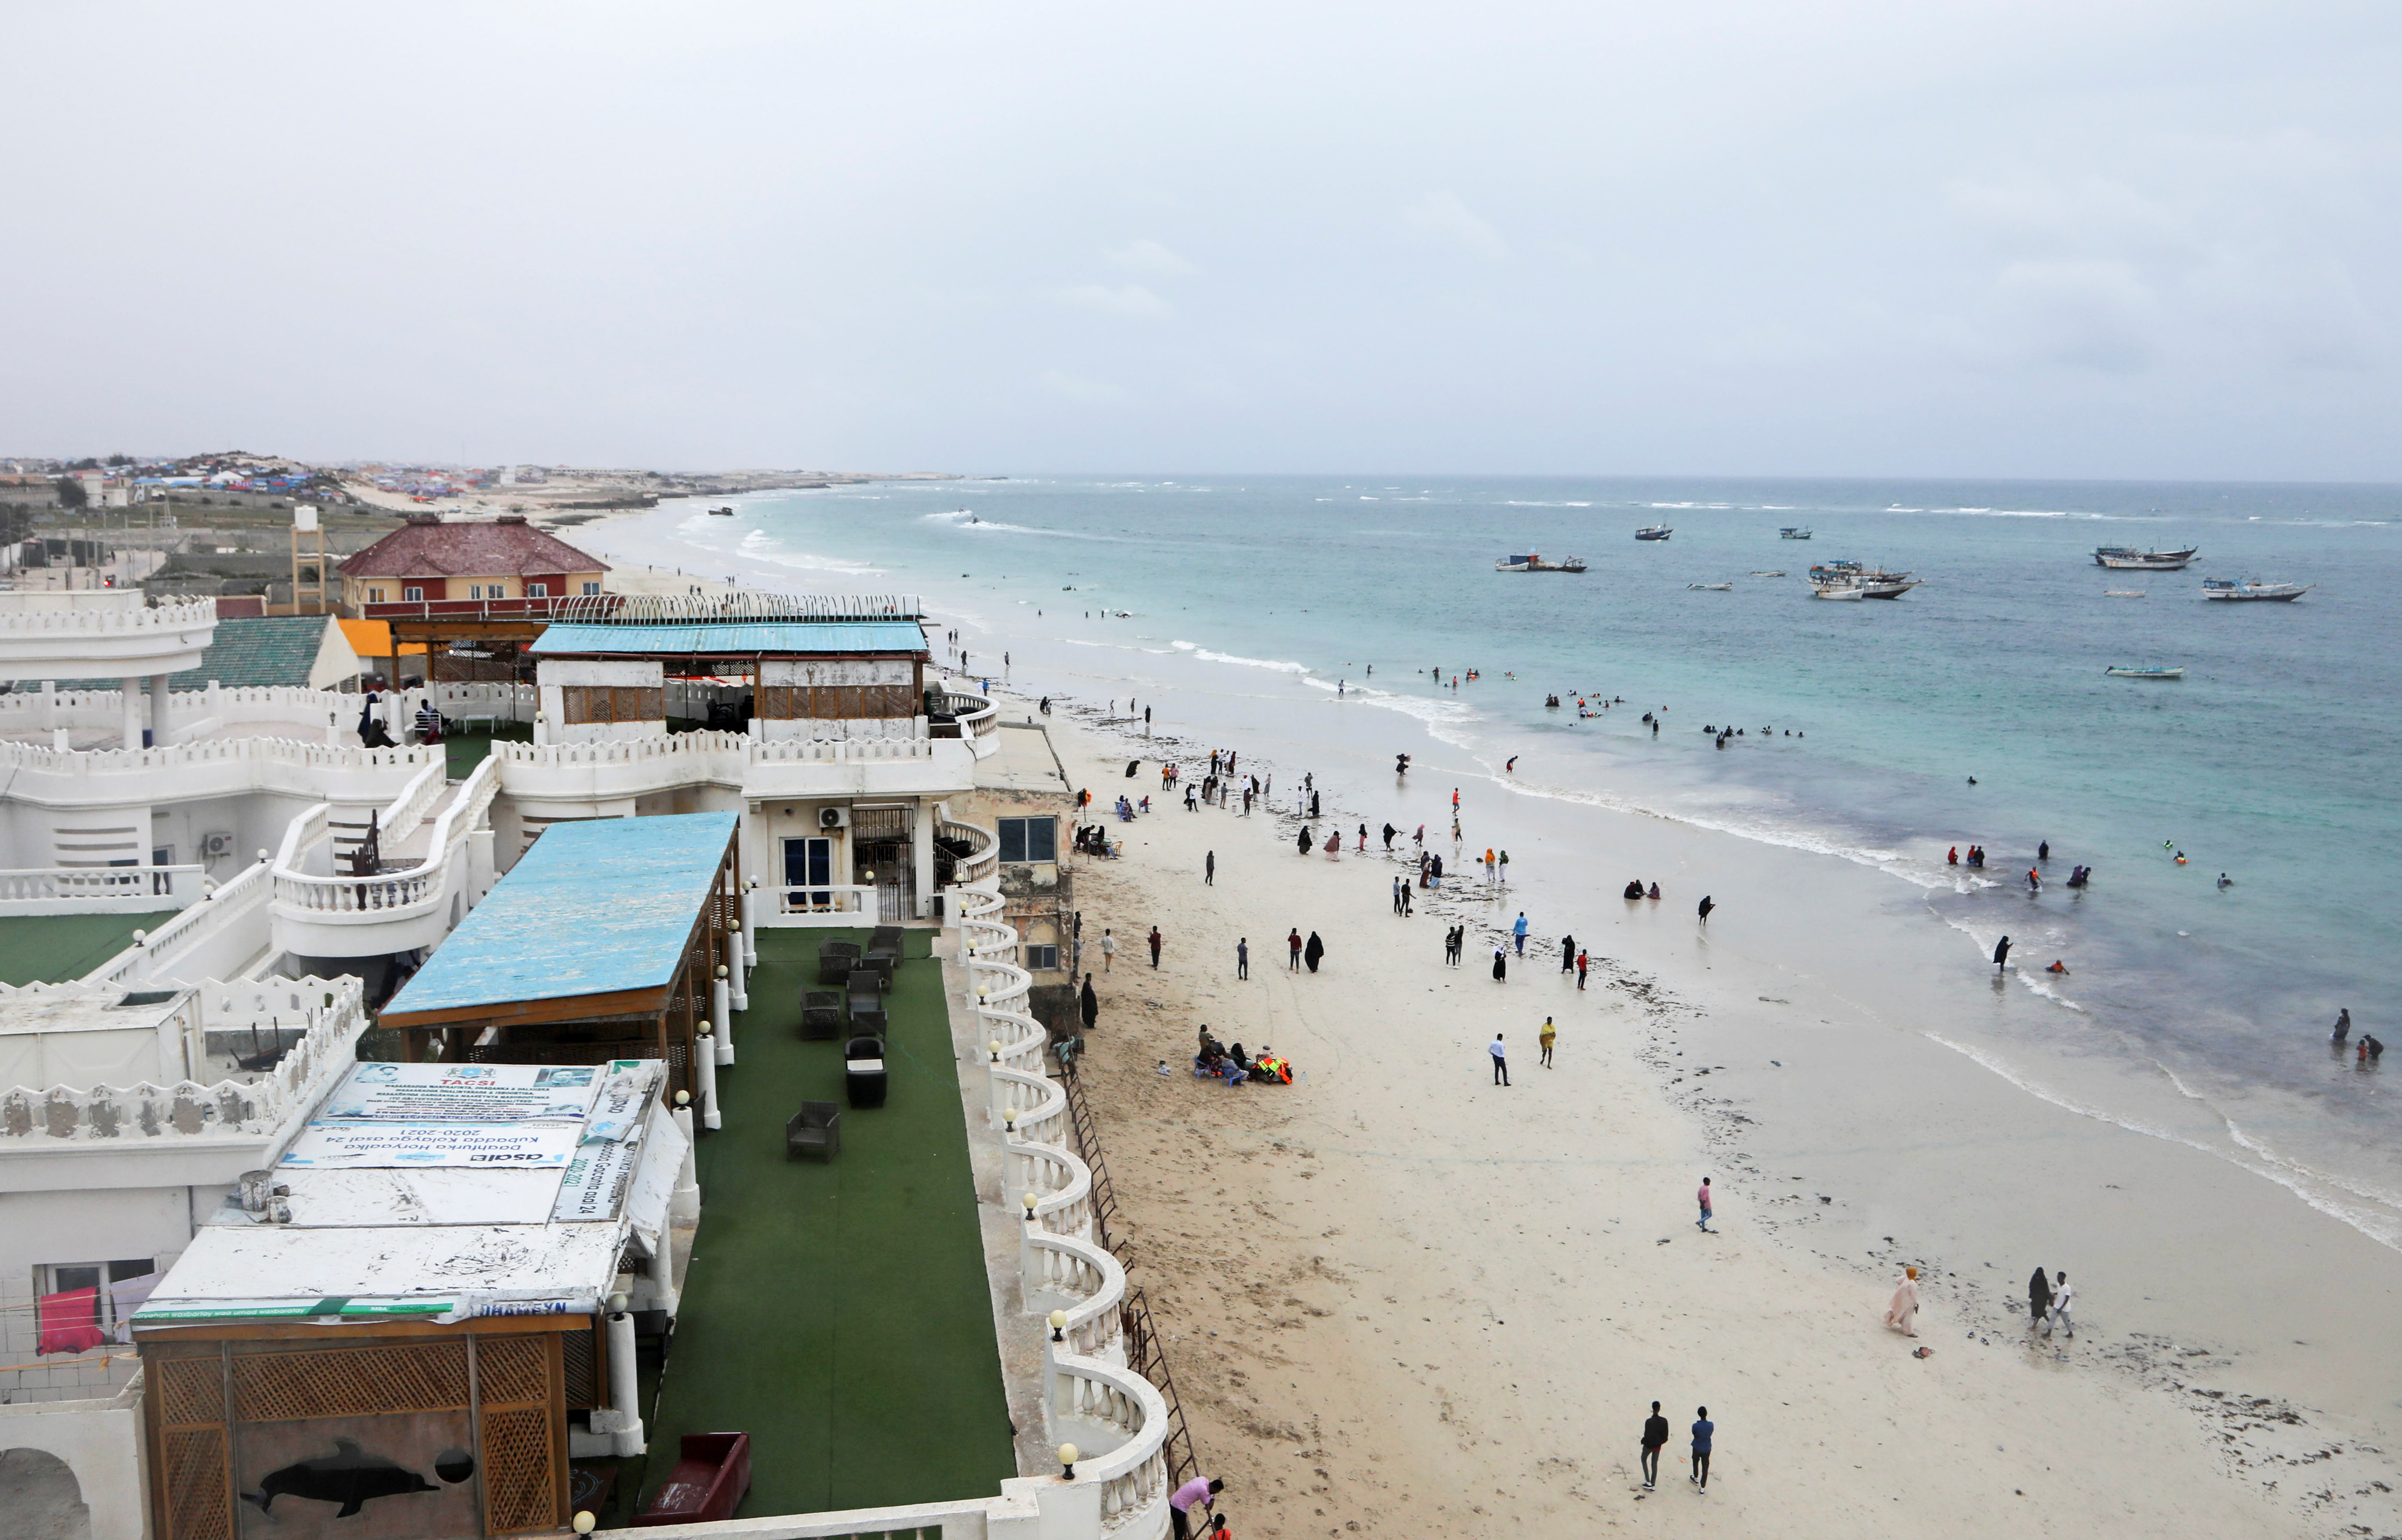 A general view of people on the Liido beach in Mogadishu